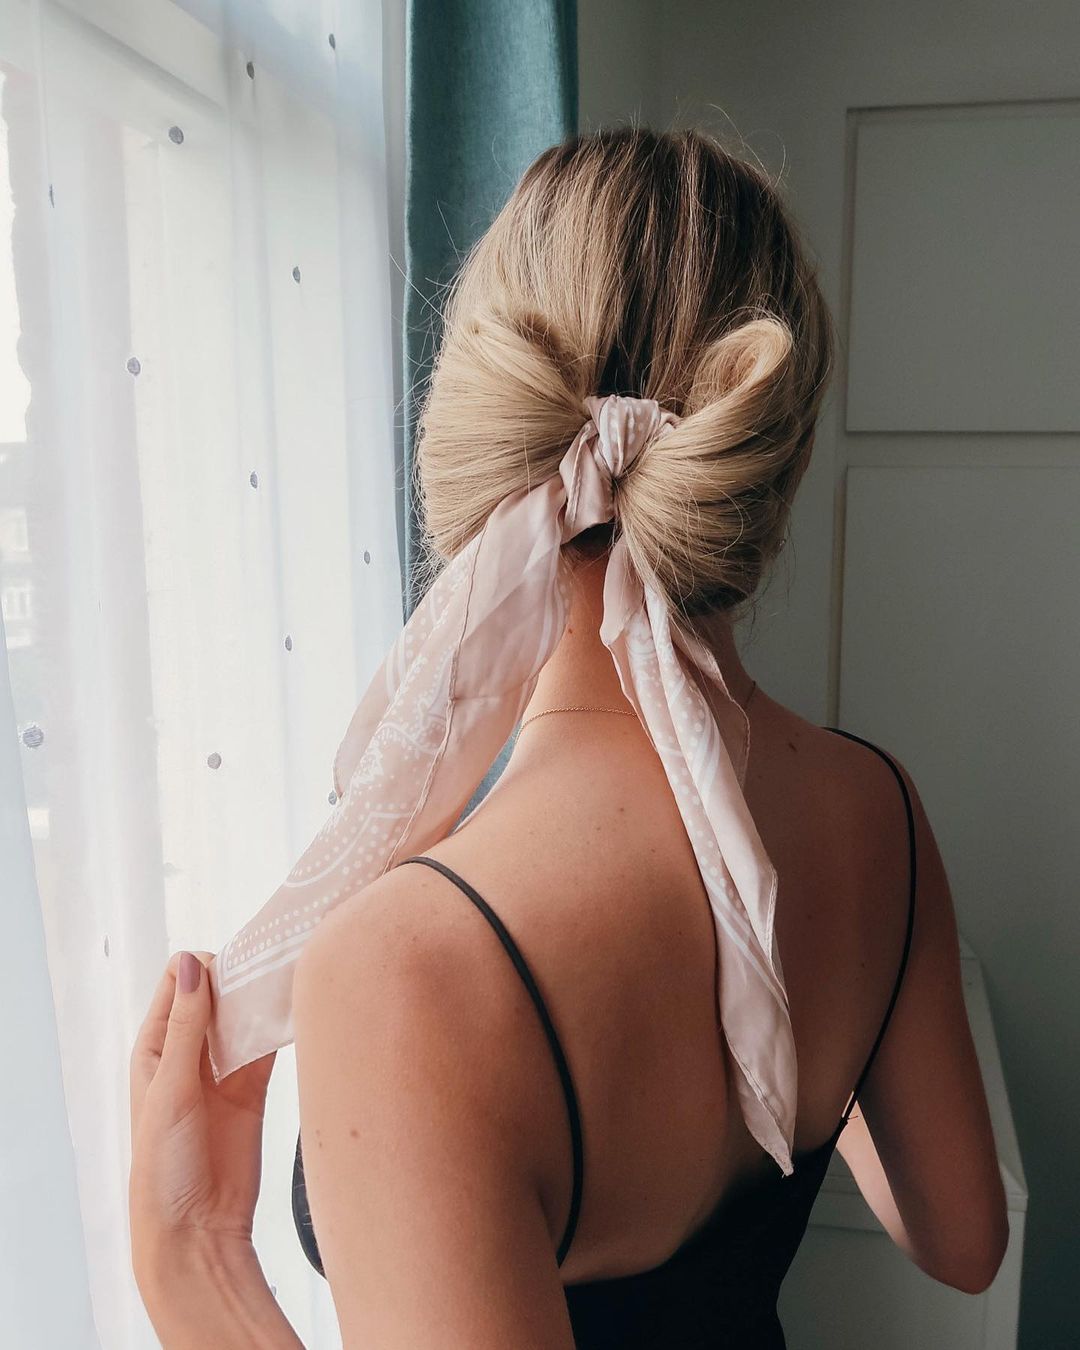 bow updo